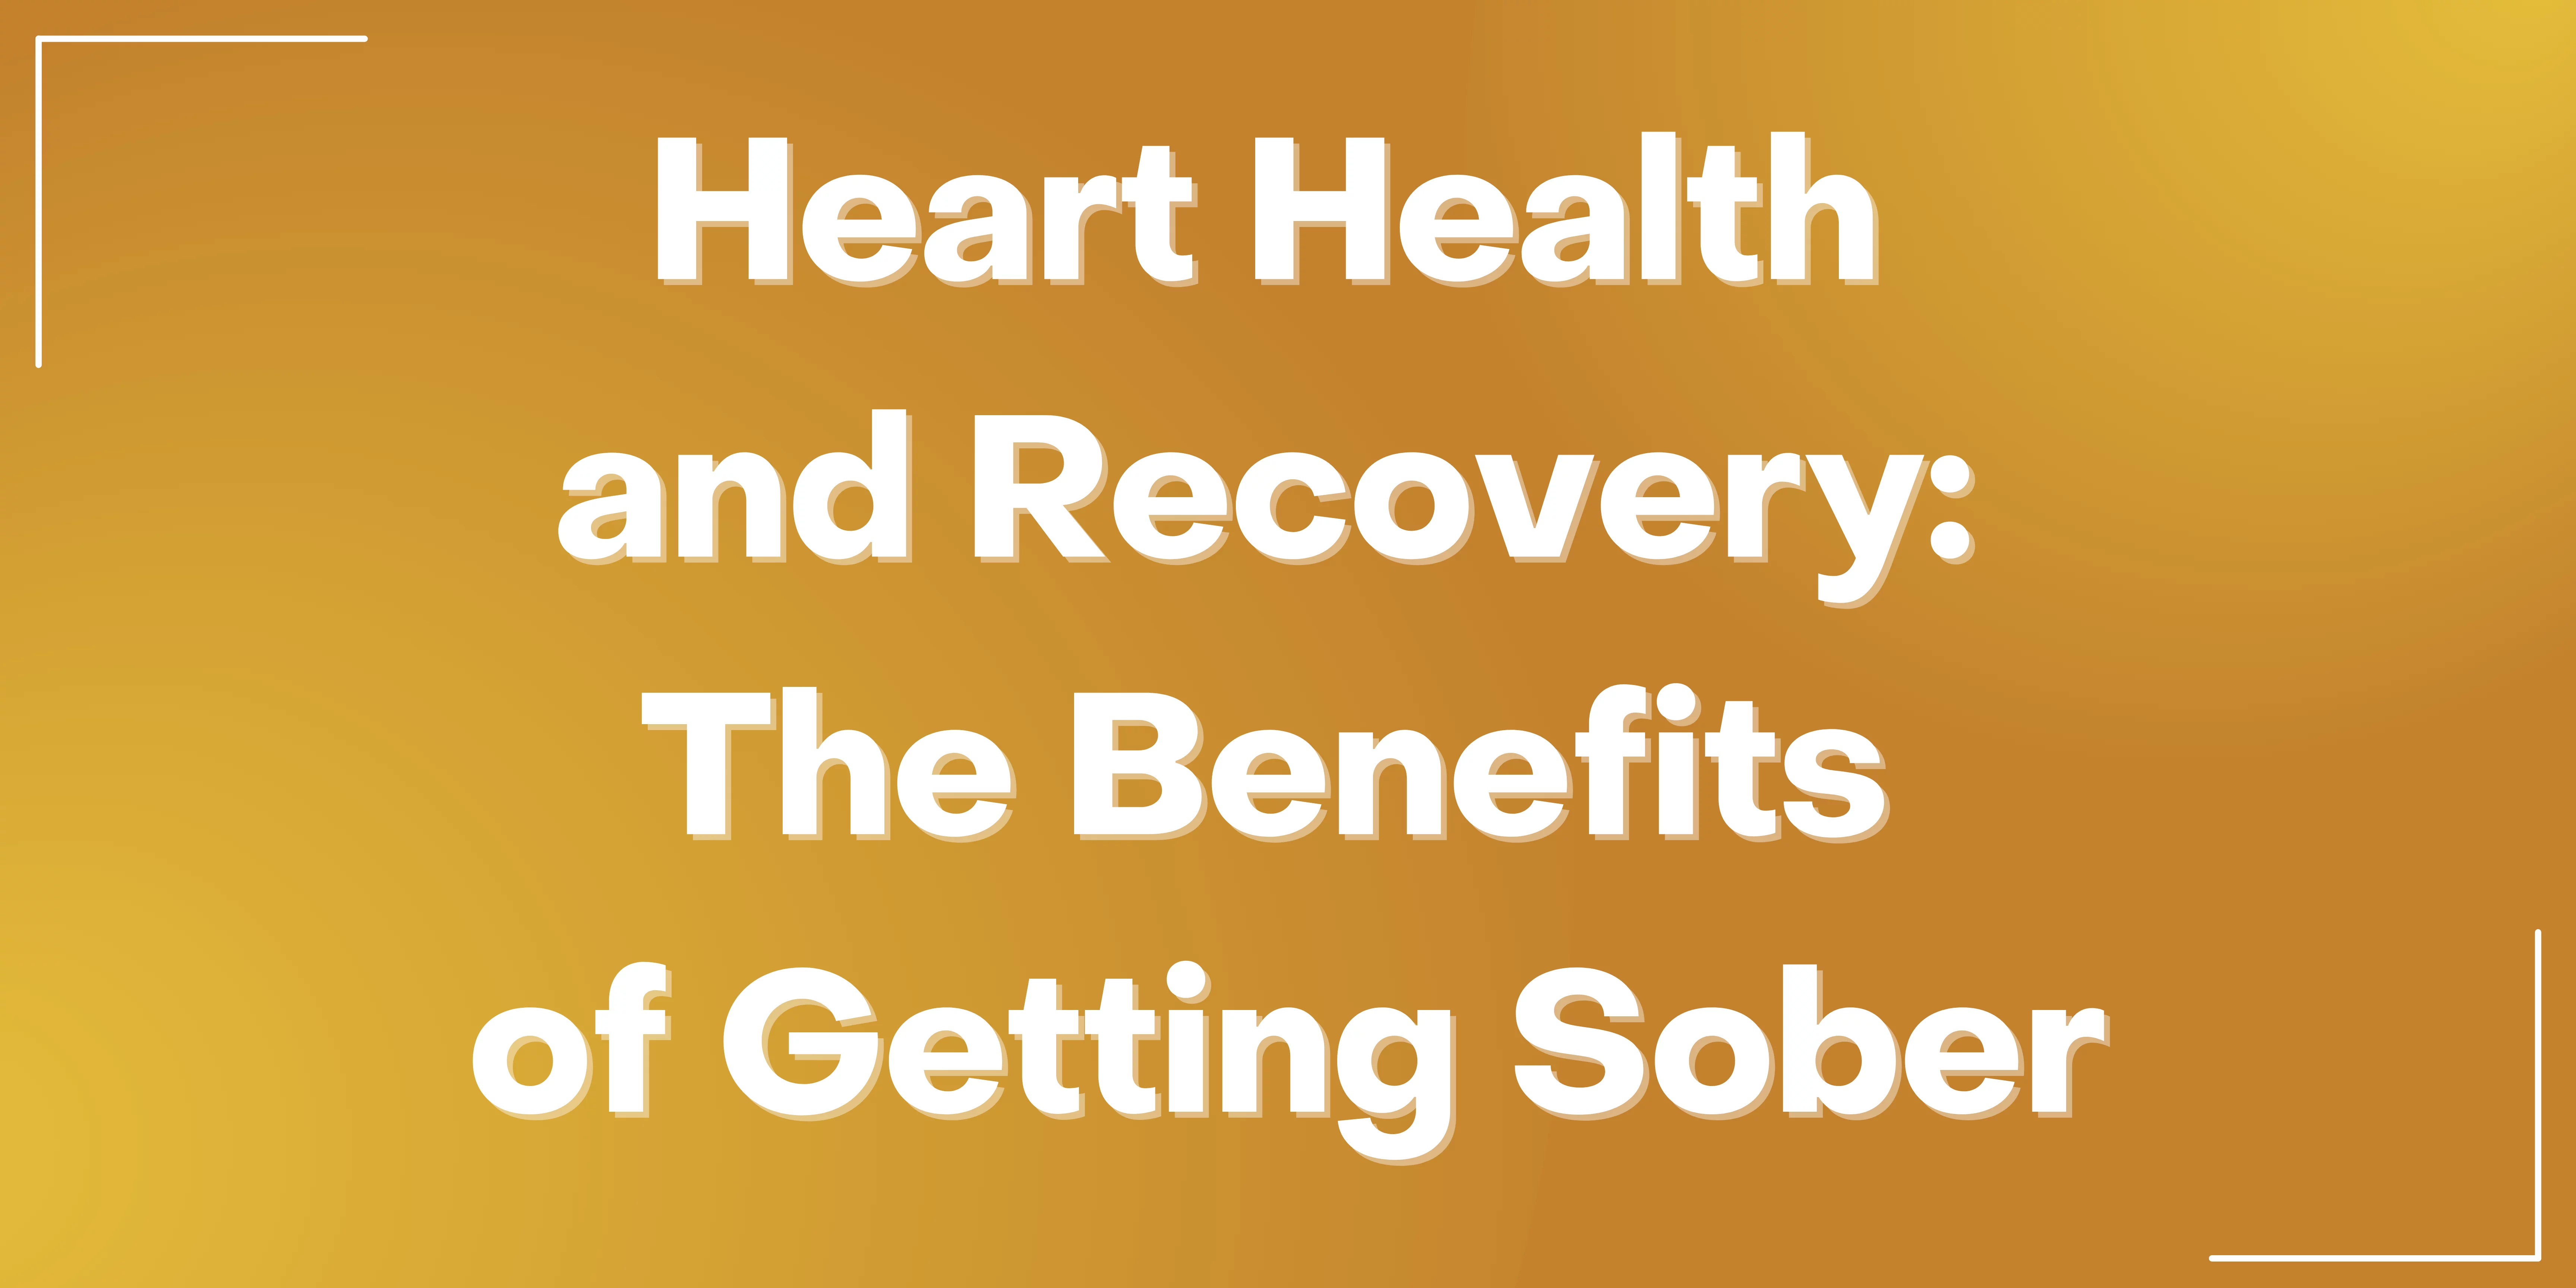 Heart Health and Recovery: The Benefits of Getting Sober